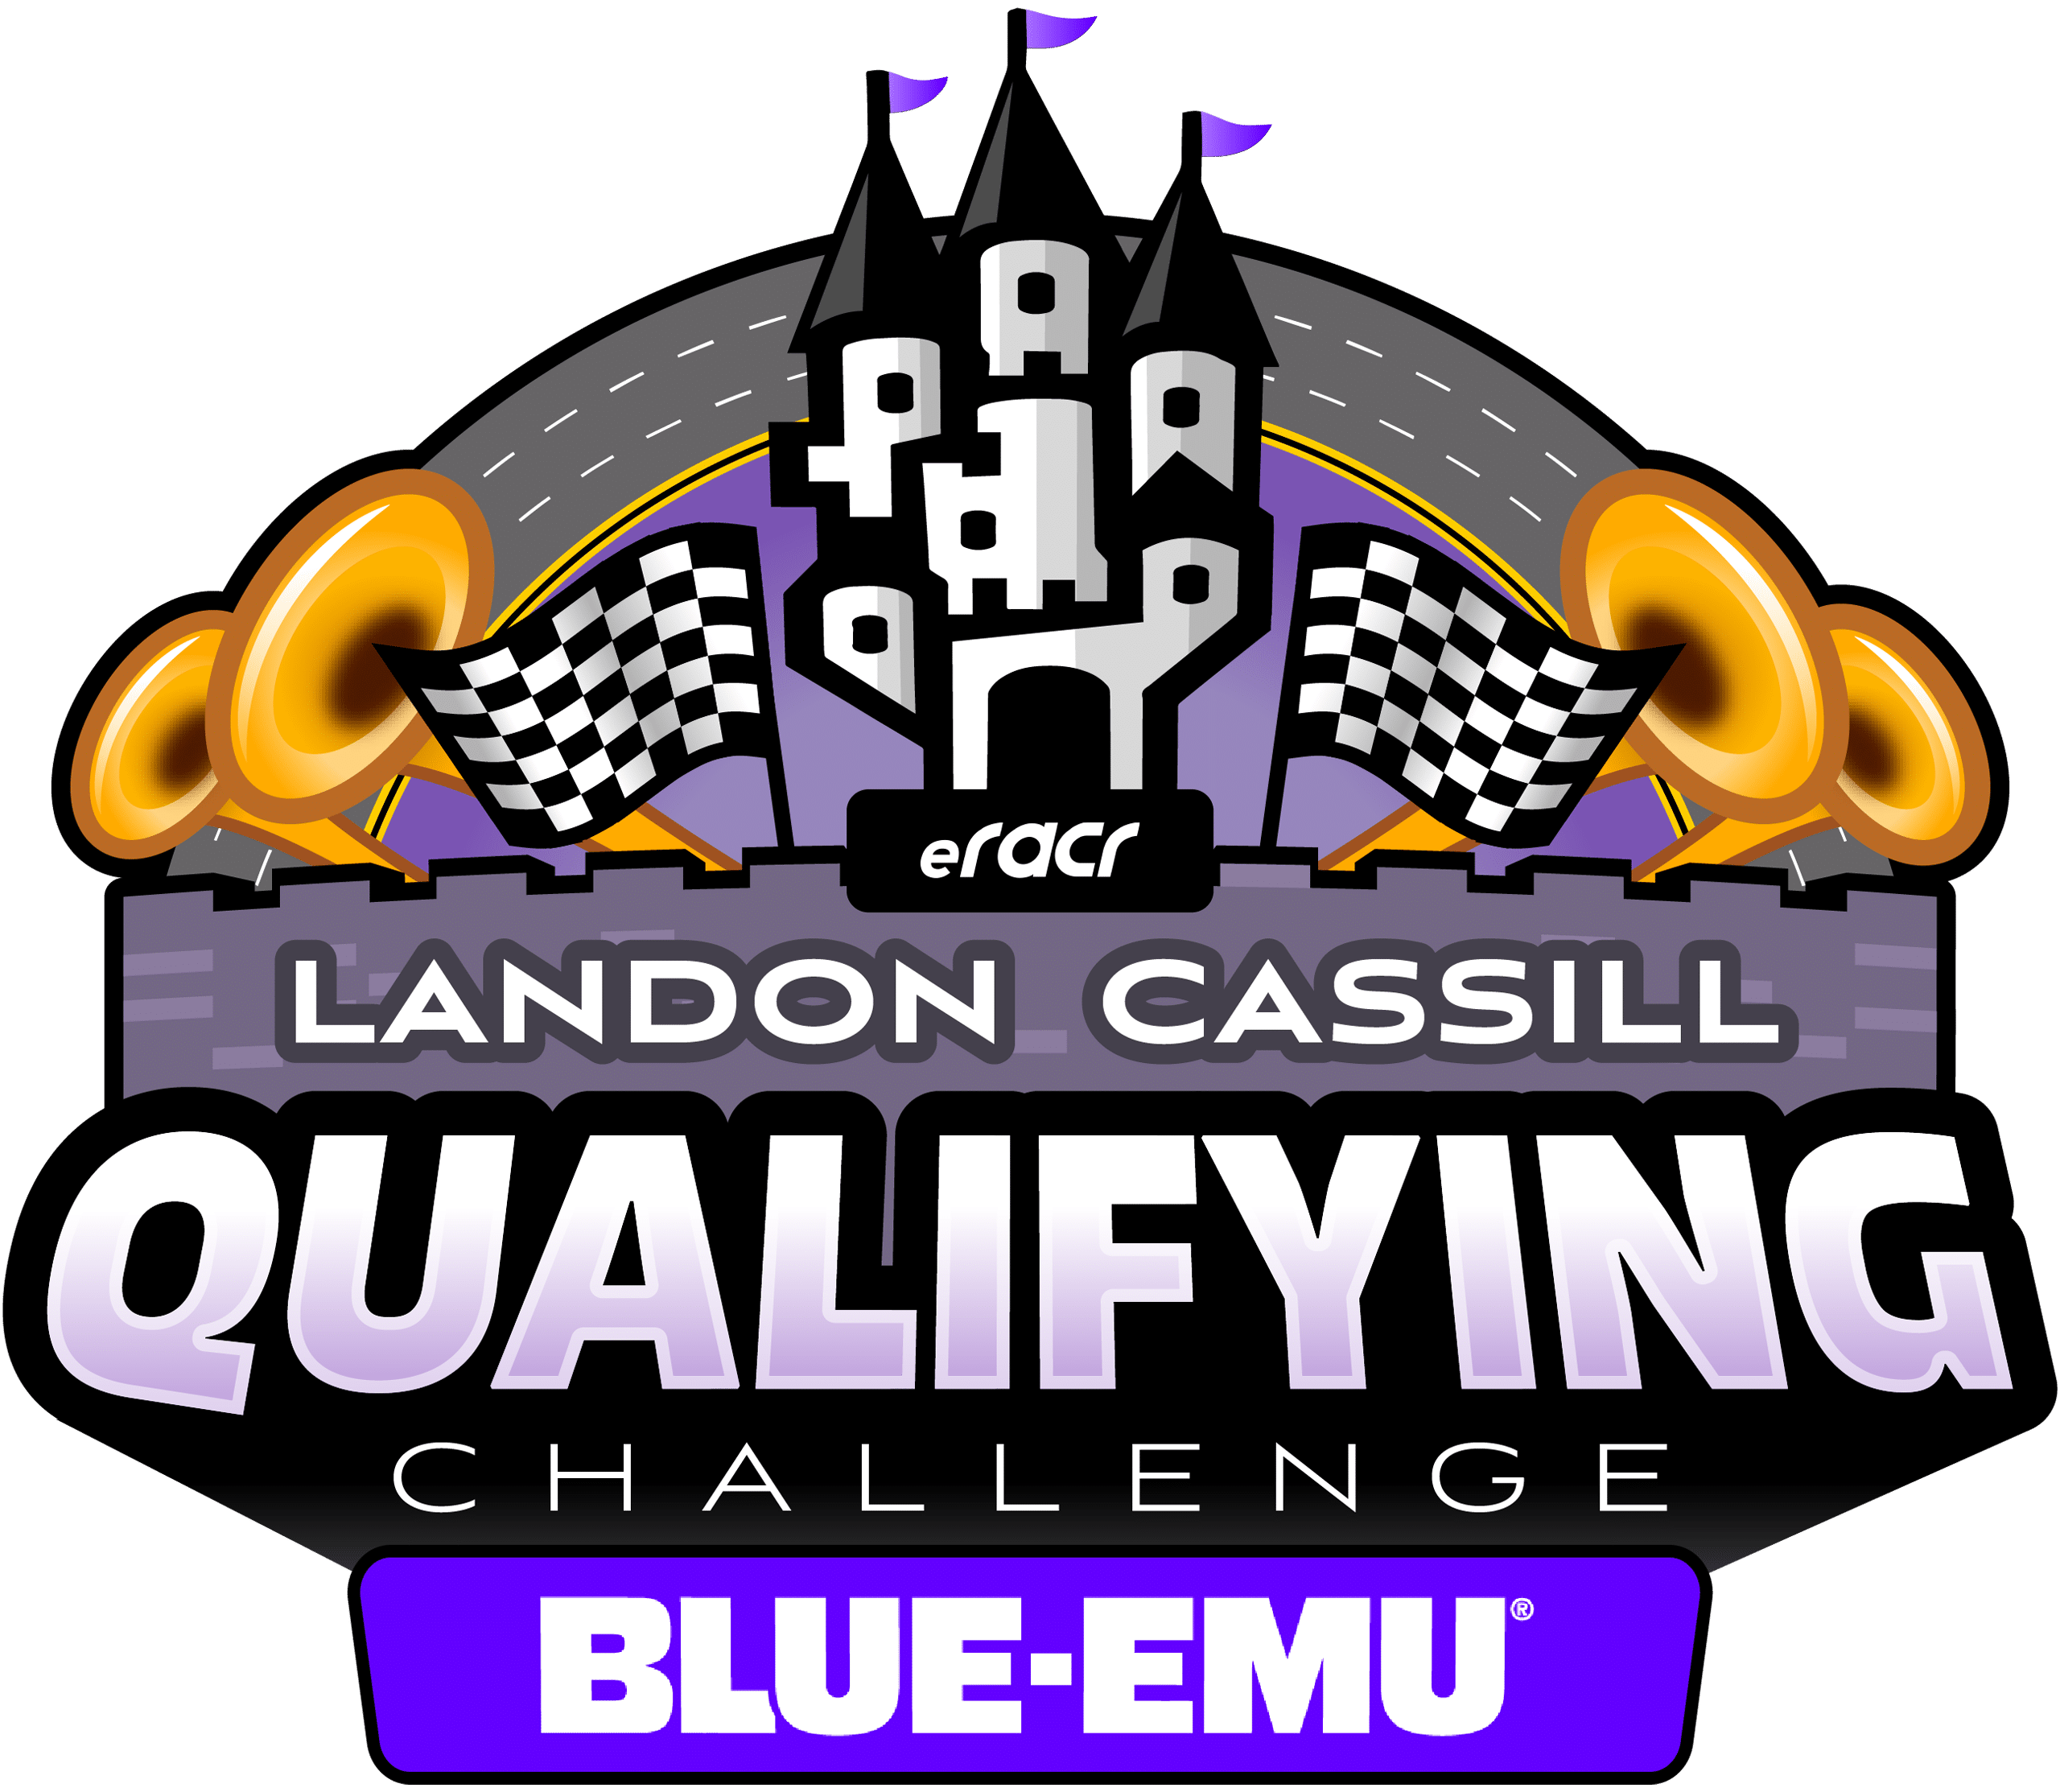 The Landon Cassill Qualifying Challenge Returns for 2021 with Support from Blue-Emu